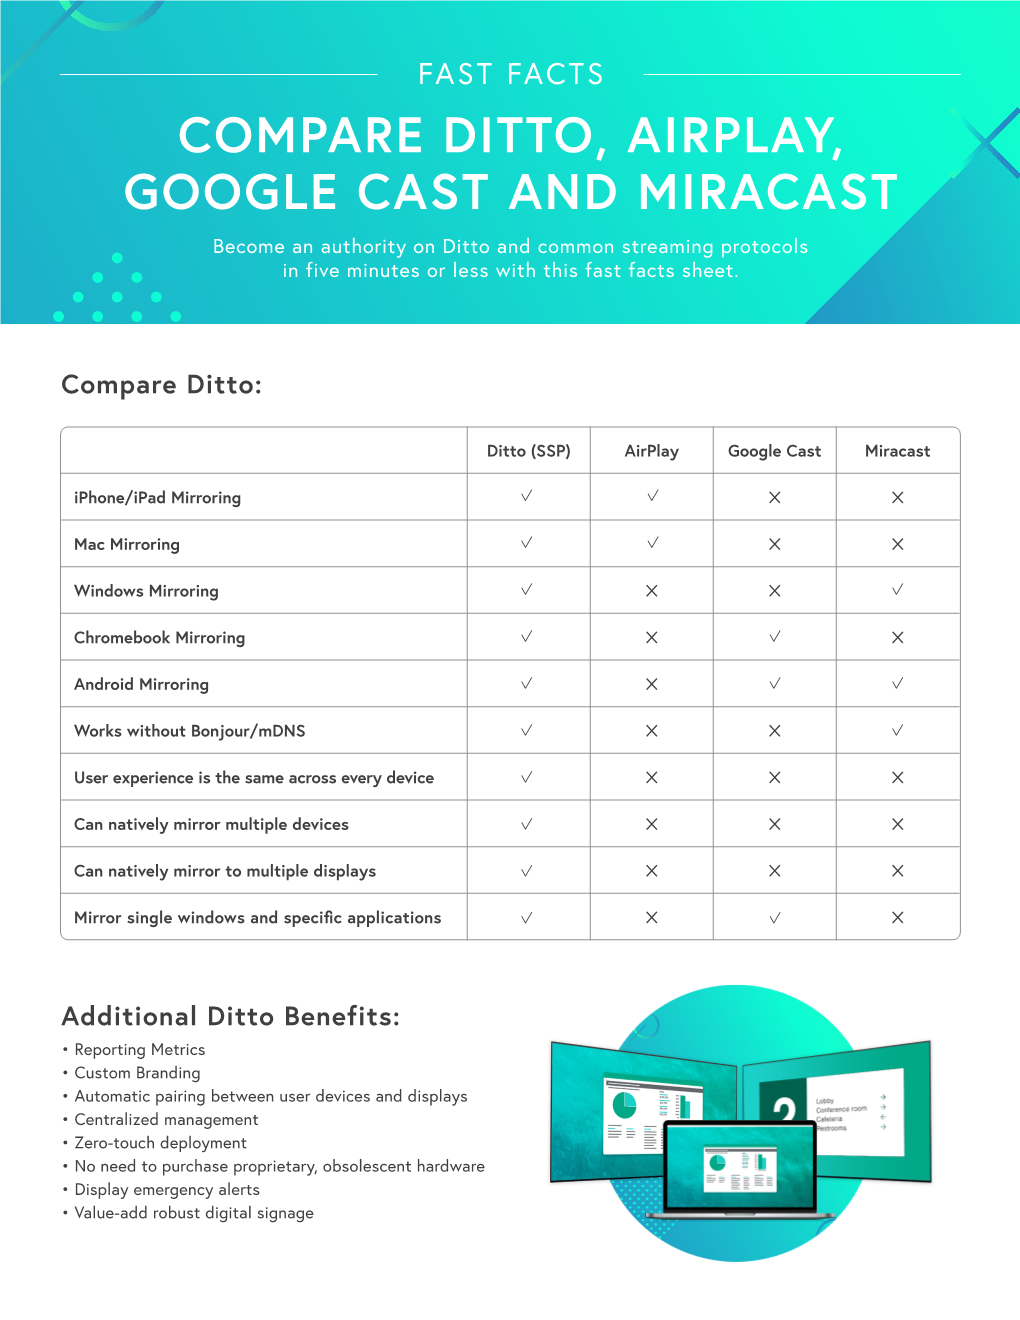 COMPARE DITTO, AIRPLAY, GOOGLE CAST and MIRACAST Become an Authority on Ditto and Common Streaming Protocols in Five Minutes Or Less with This Fast Facts Sheet